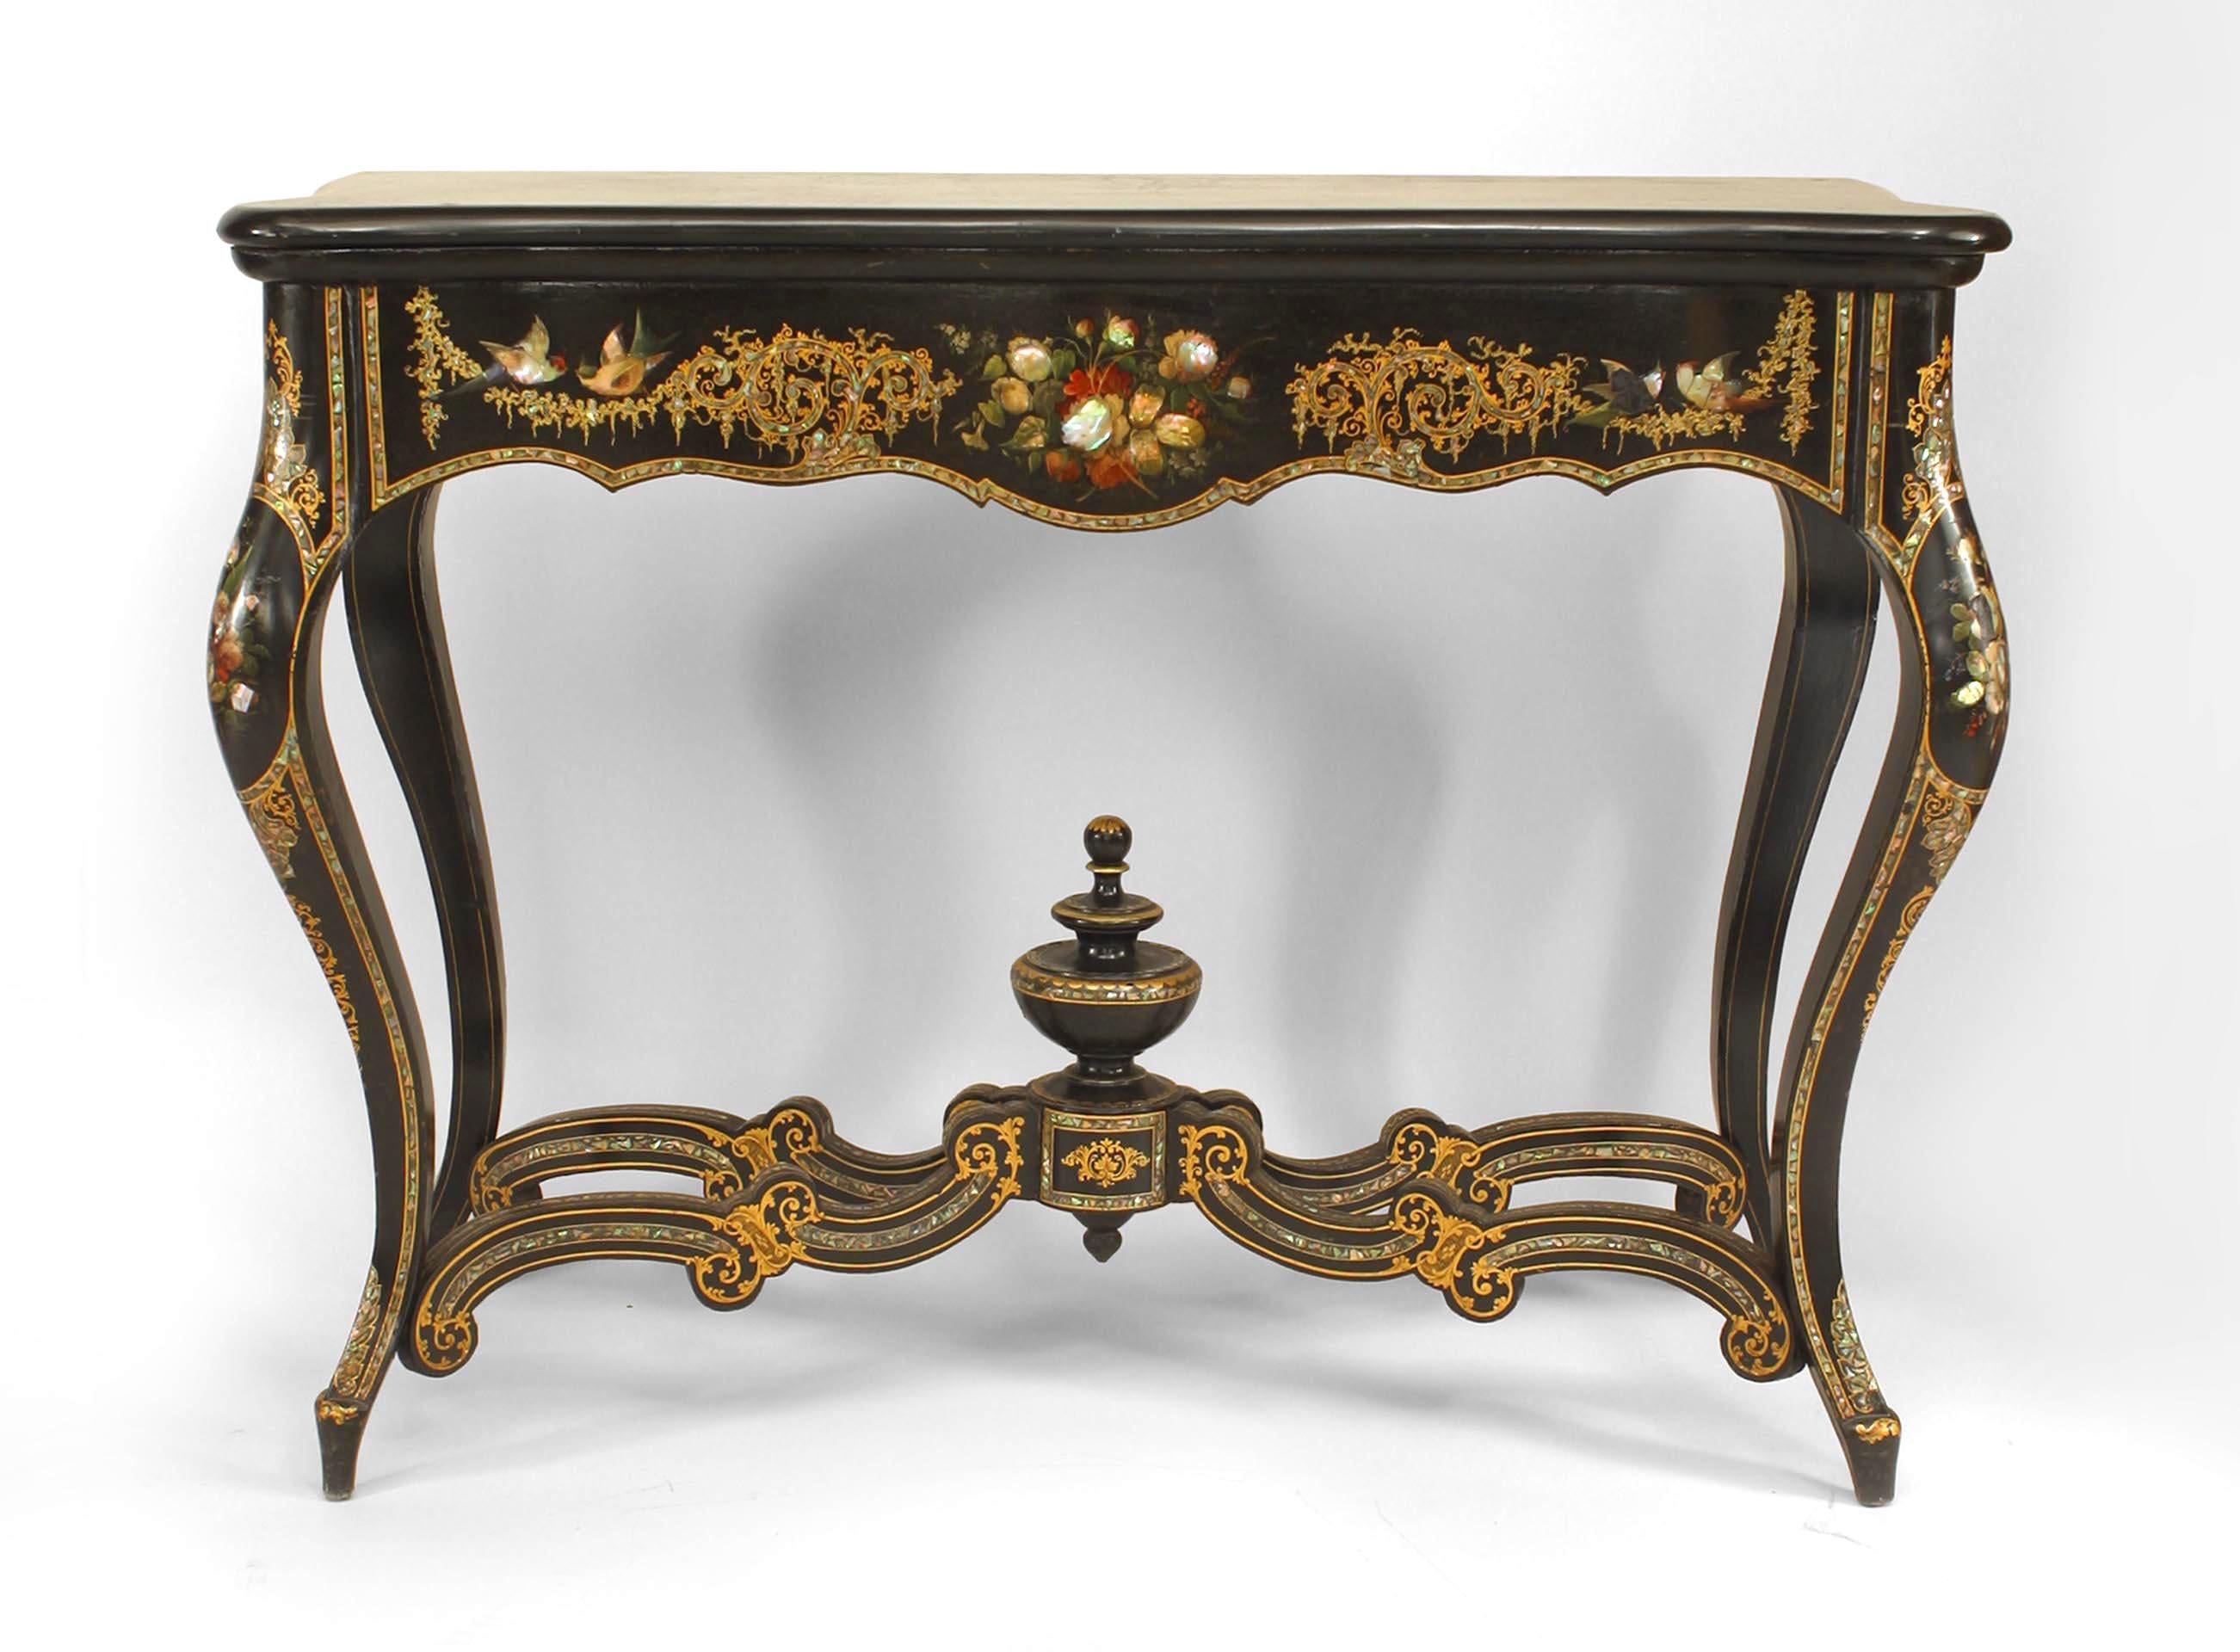 English Victorian papier mache pearl inlaid black lacquered console table with urn stretcher and black marble top.
